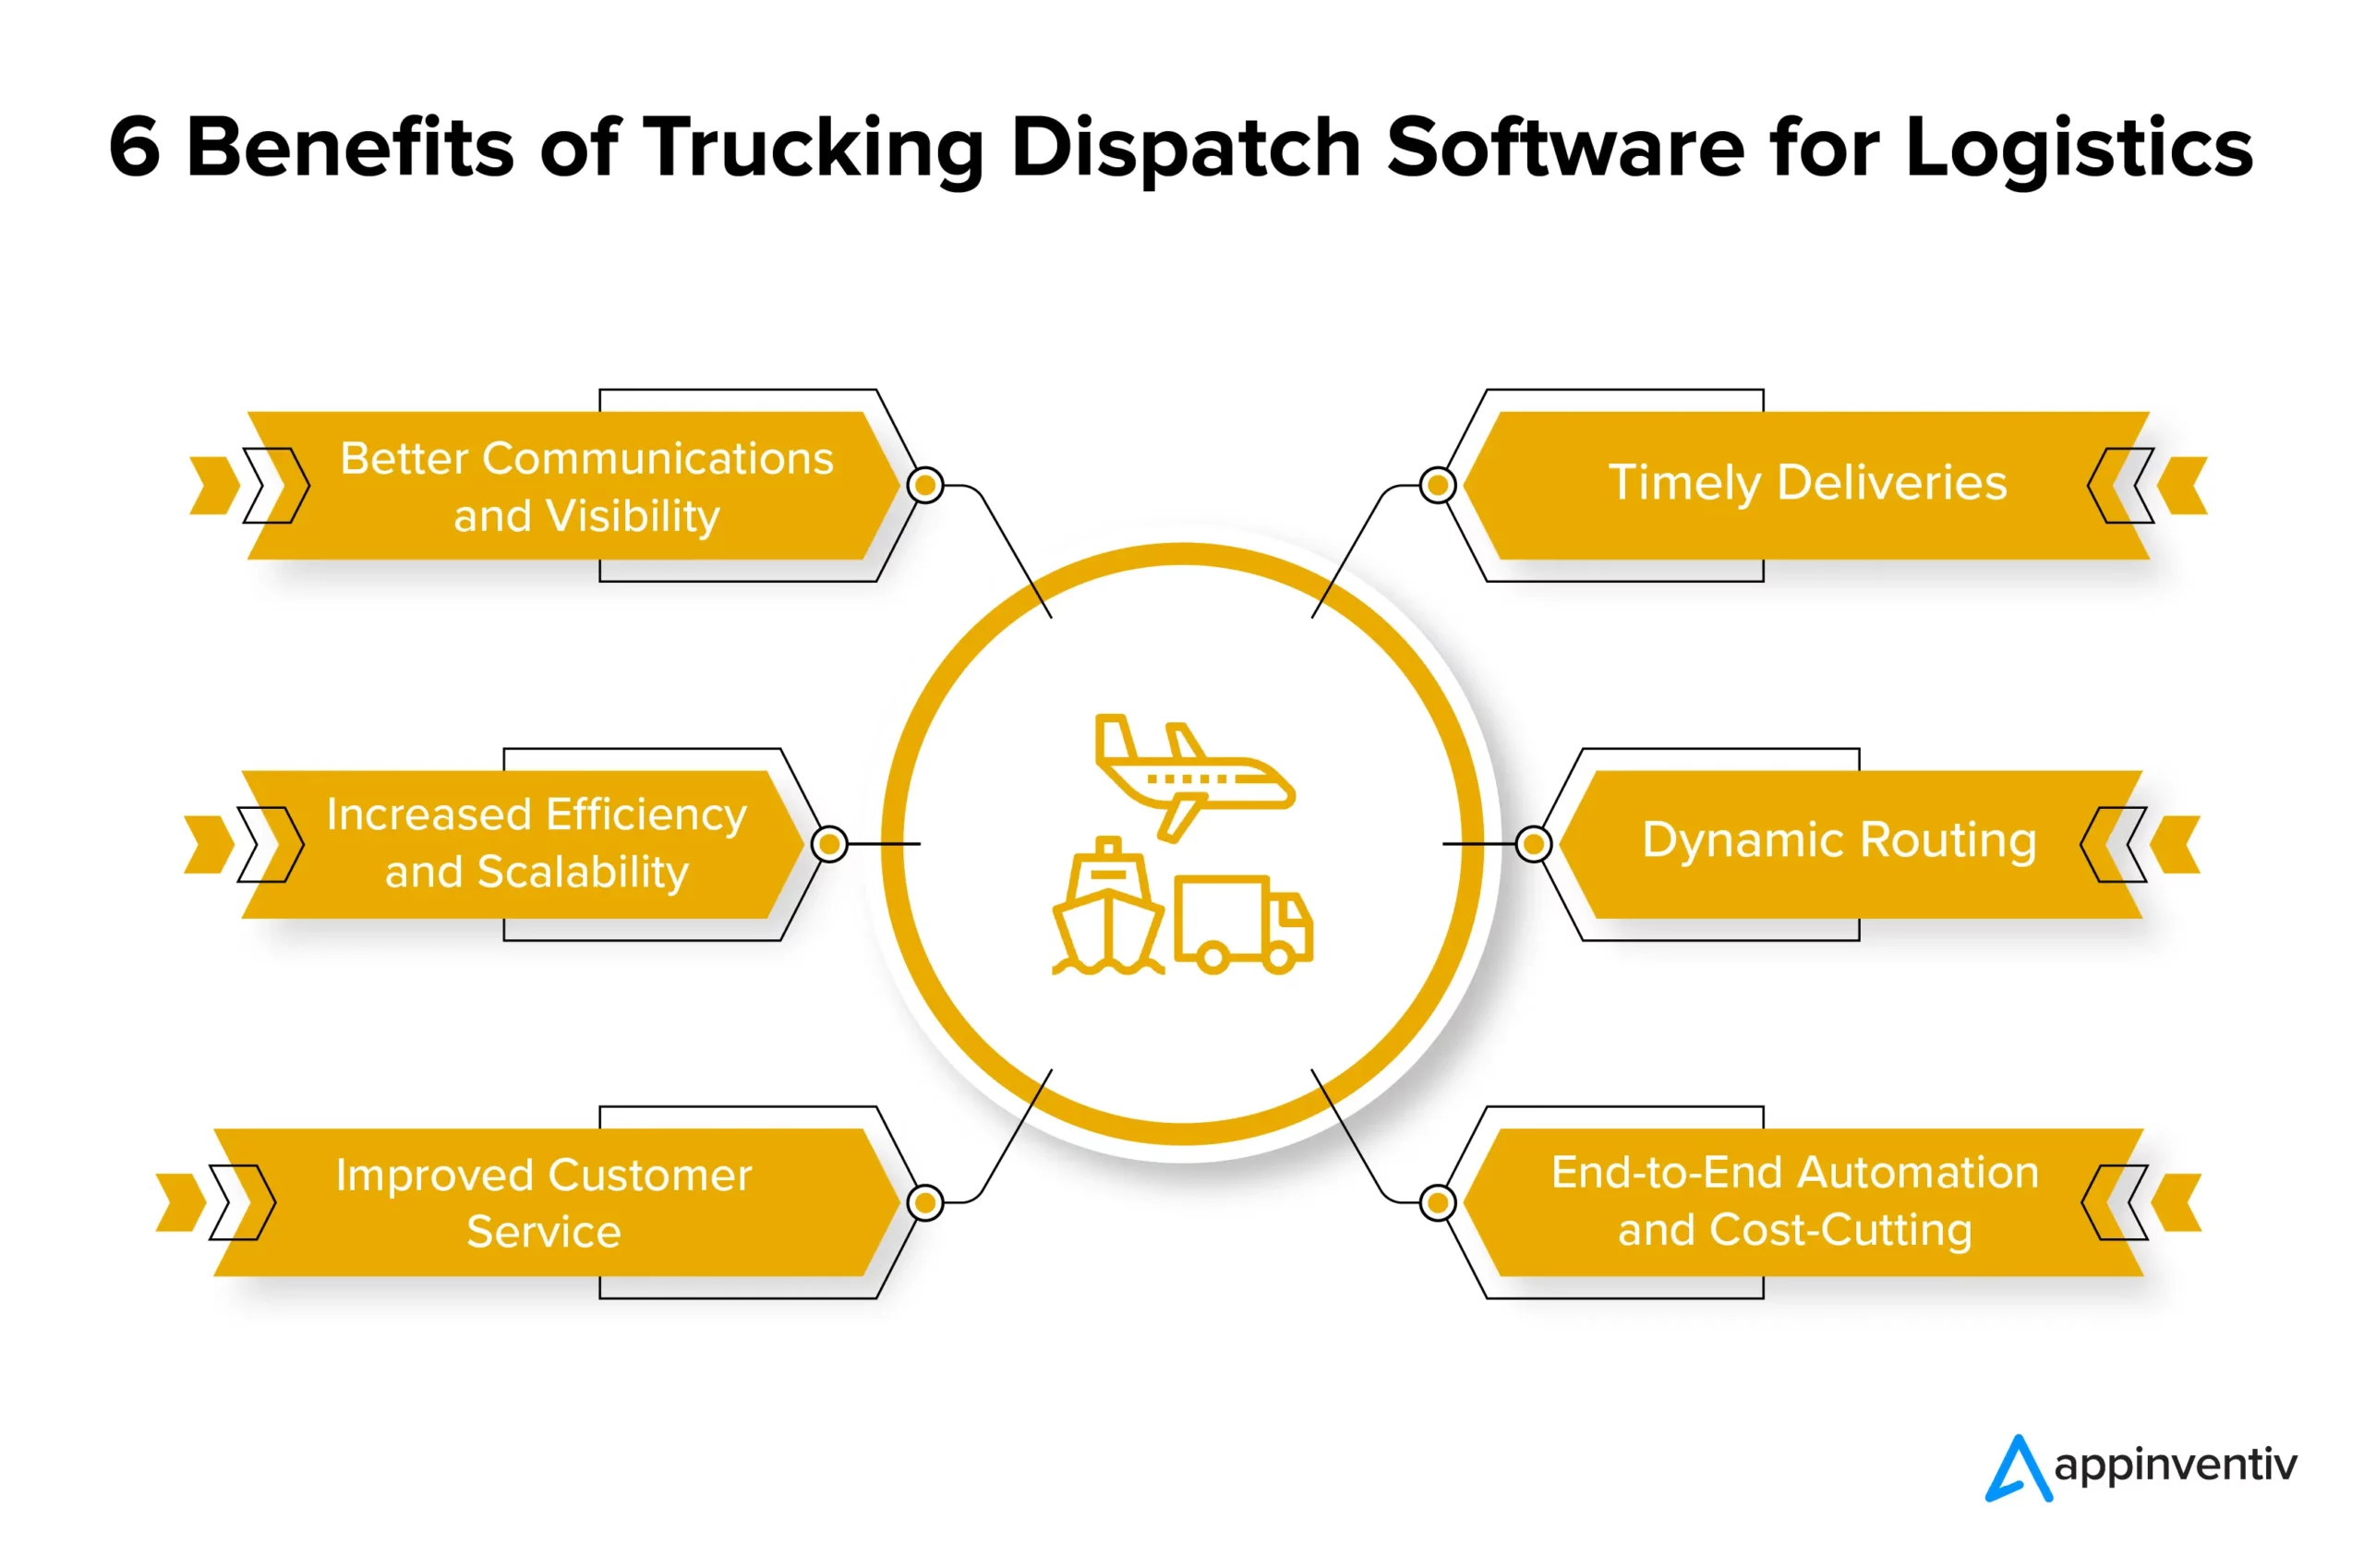 Steps to Improve Efficiency With Trucking Dispatch Software